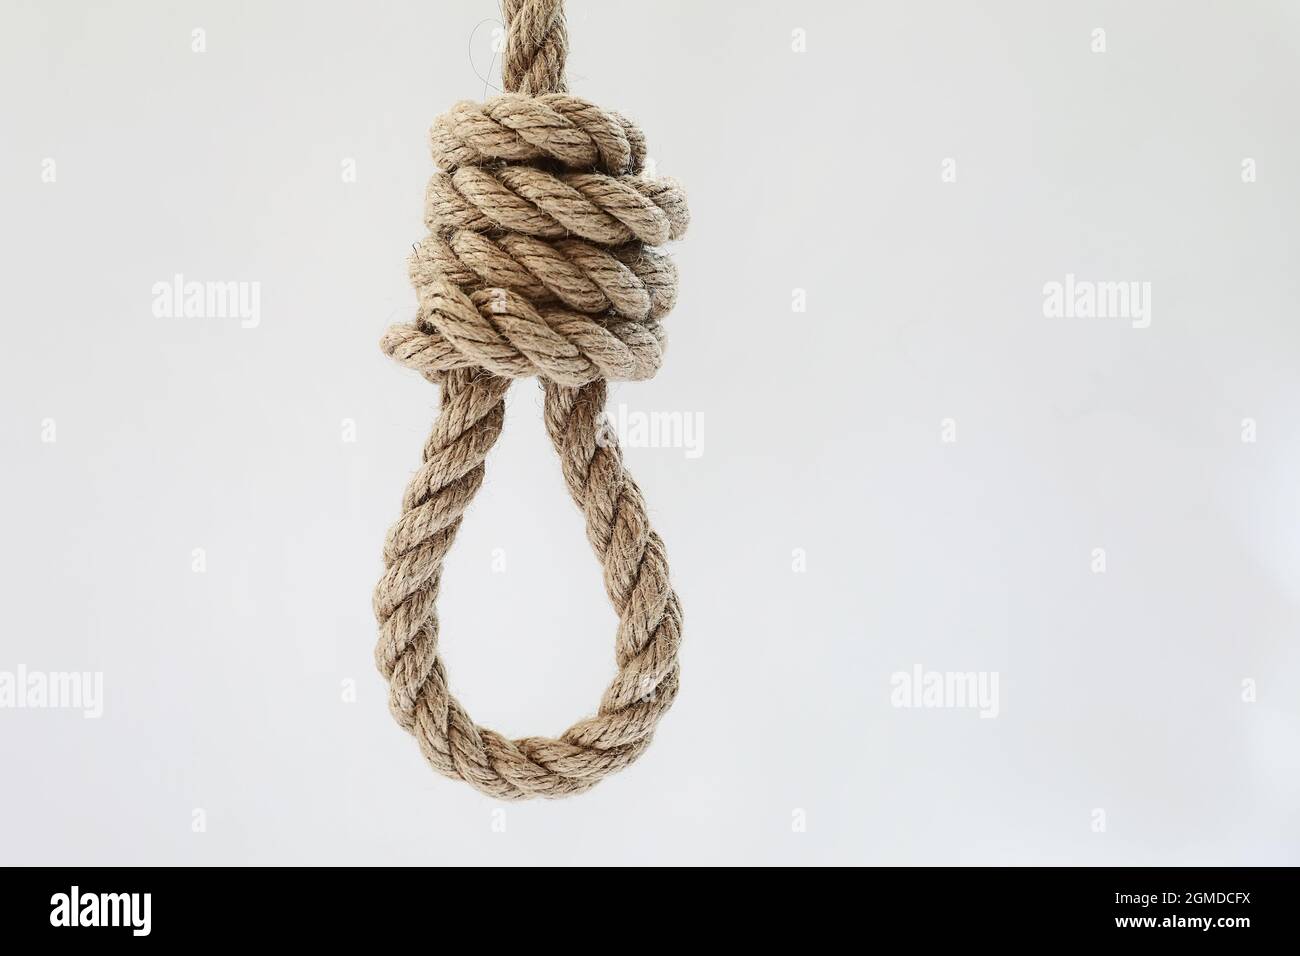 Braided Thick Rope Tied In A Skein Hemp Rope For Decoration And Design  Background From A Fishing Rope Stock Photo - Download Image Now - iStock